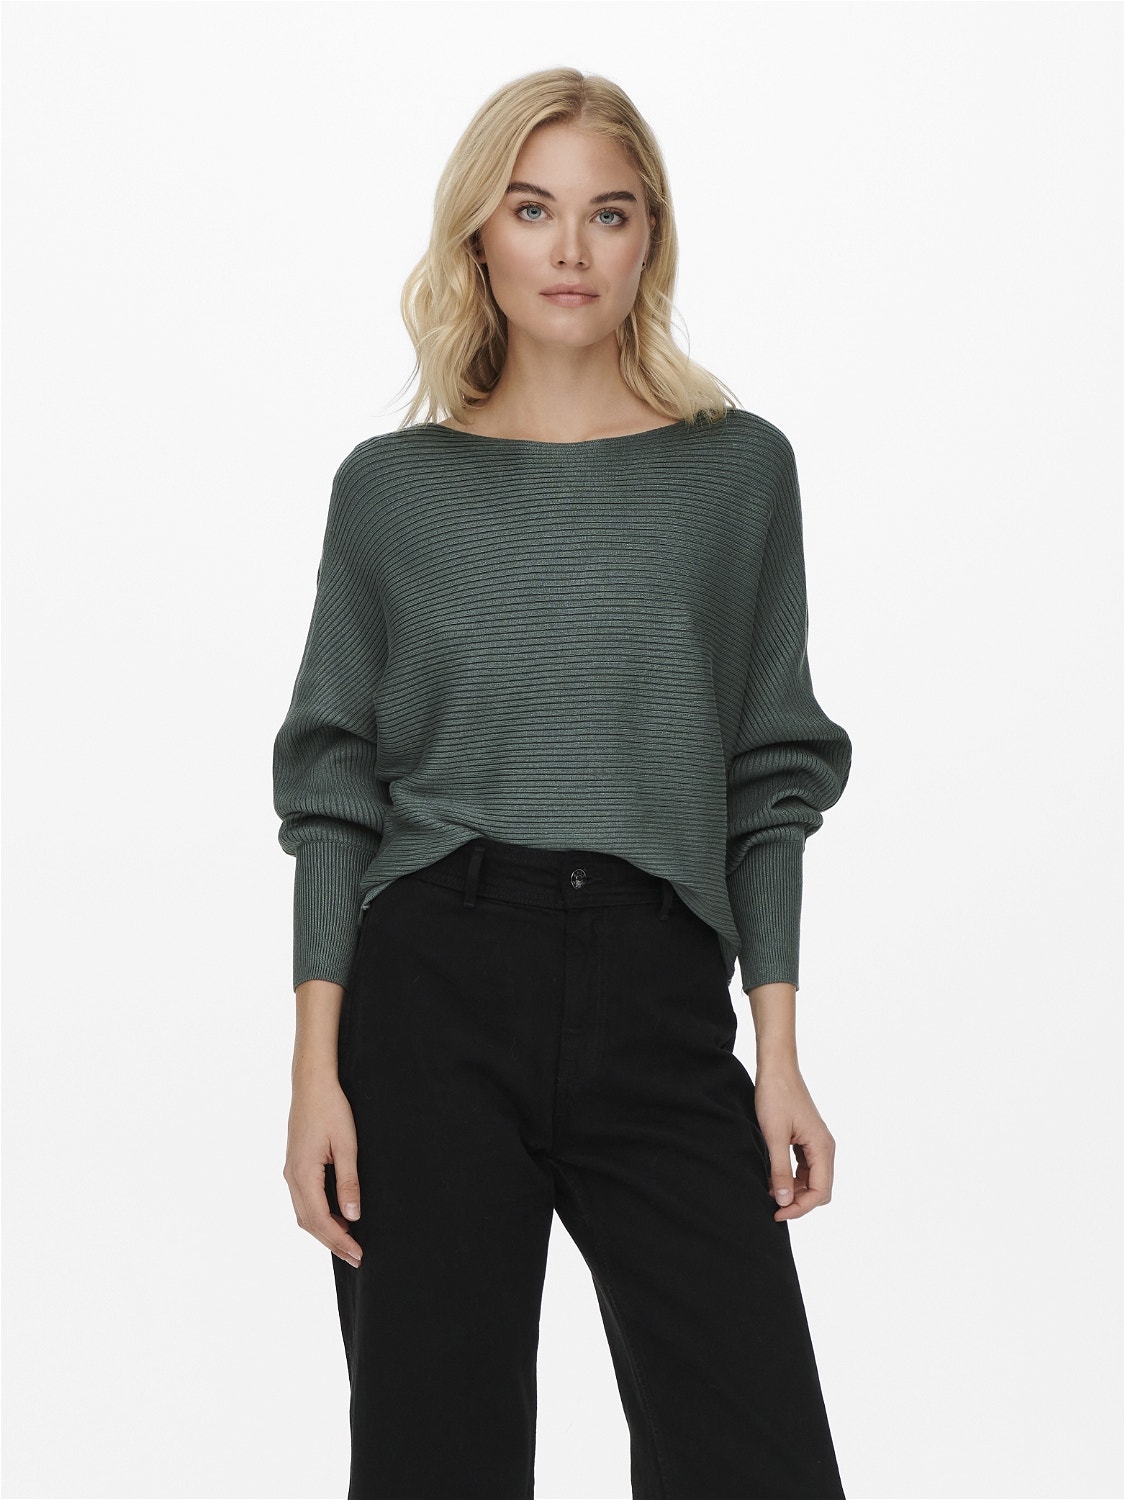 ONLY Boat neck High cuffs Pullover -Balsam Green - 15226298